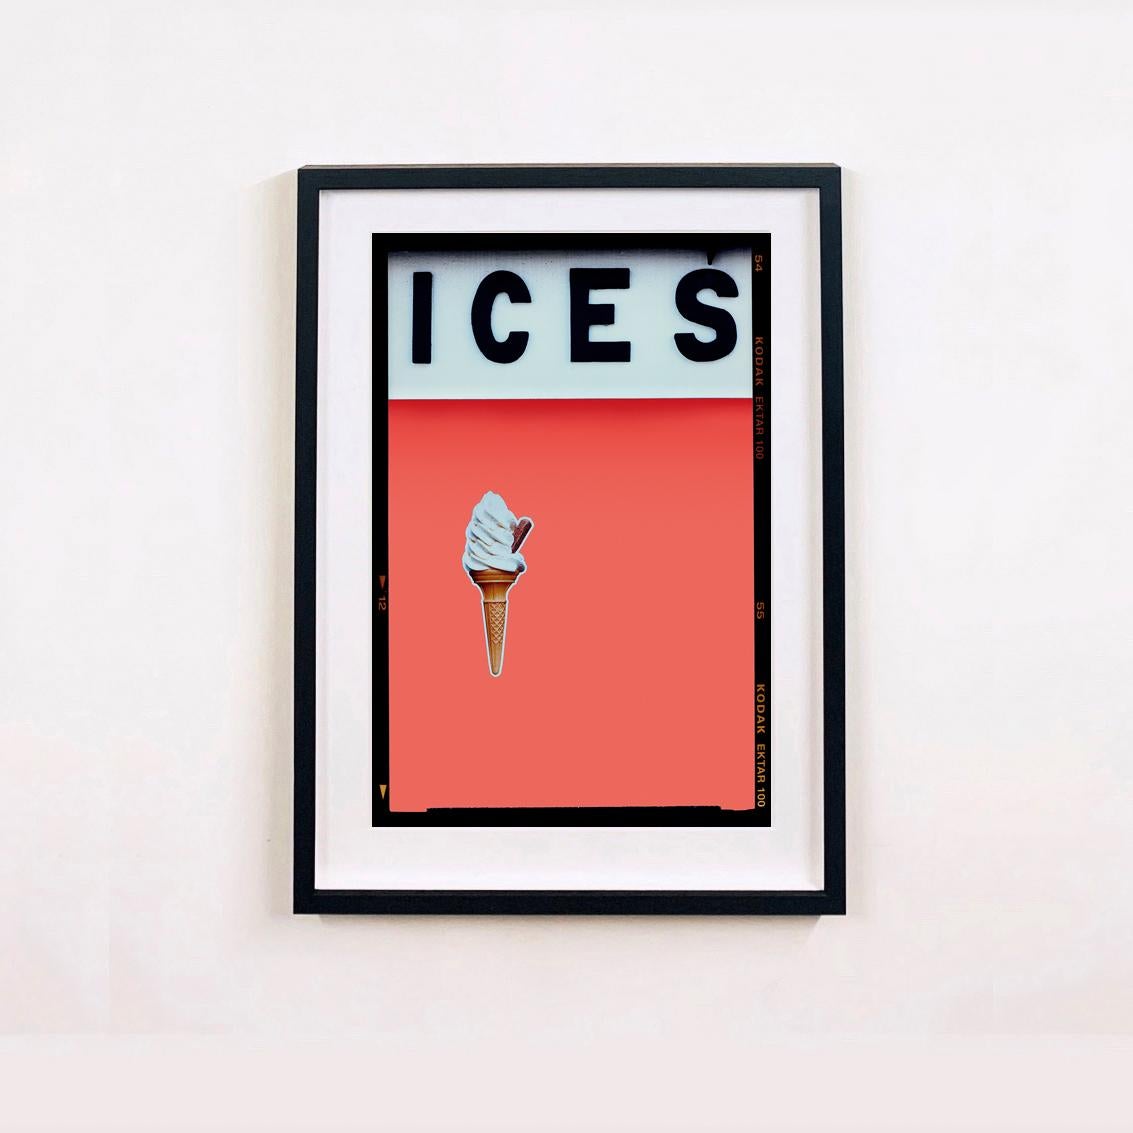 Ices (Melondrama), Bexhill-on-Sea - British seaside color photography - Photograph by Richard Heeps